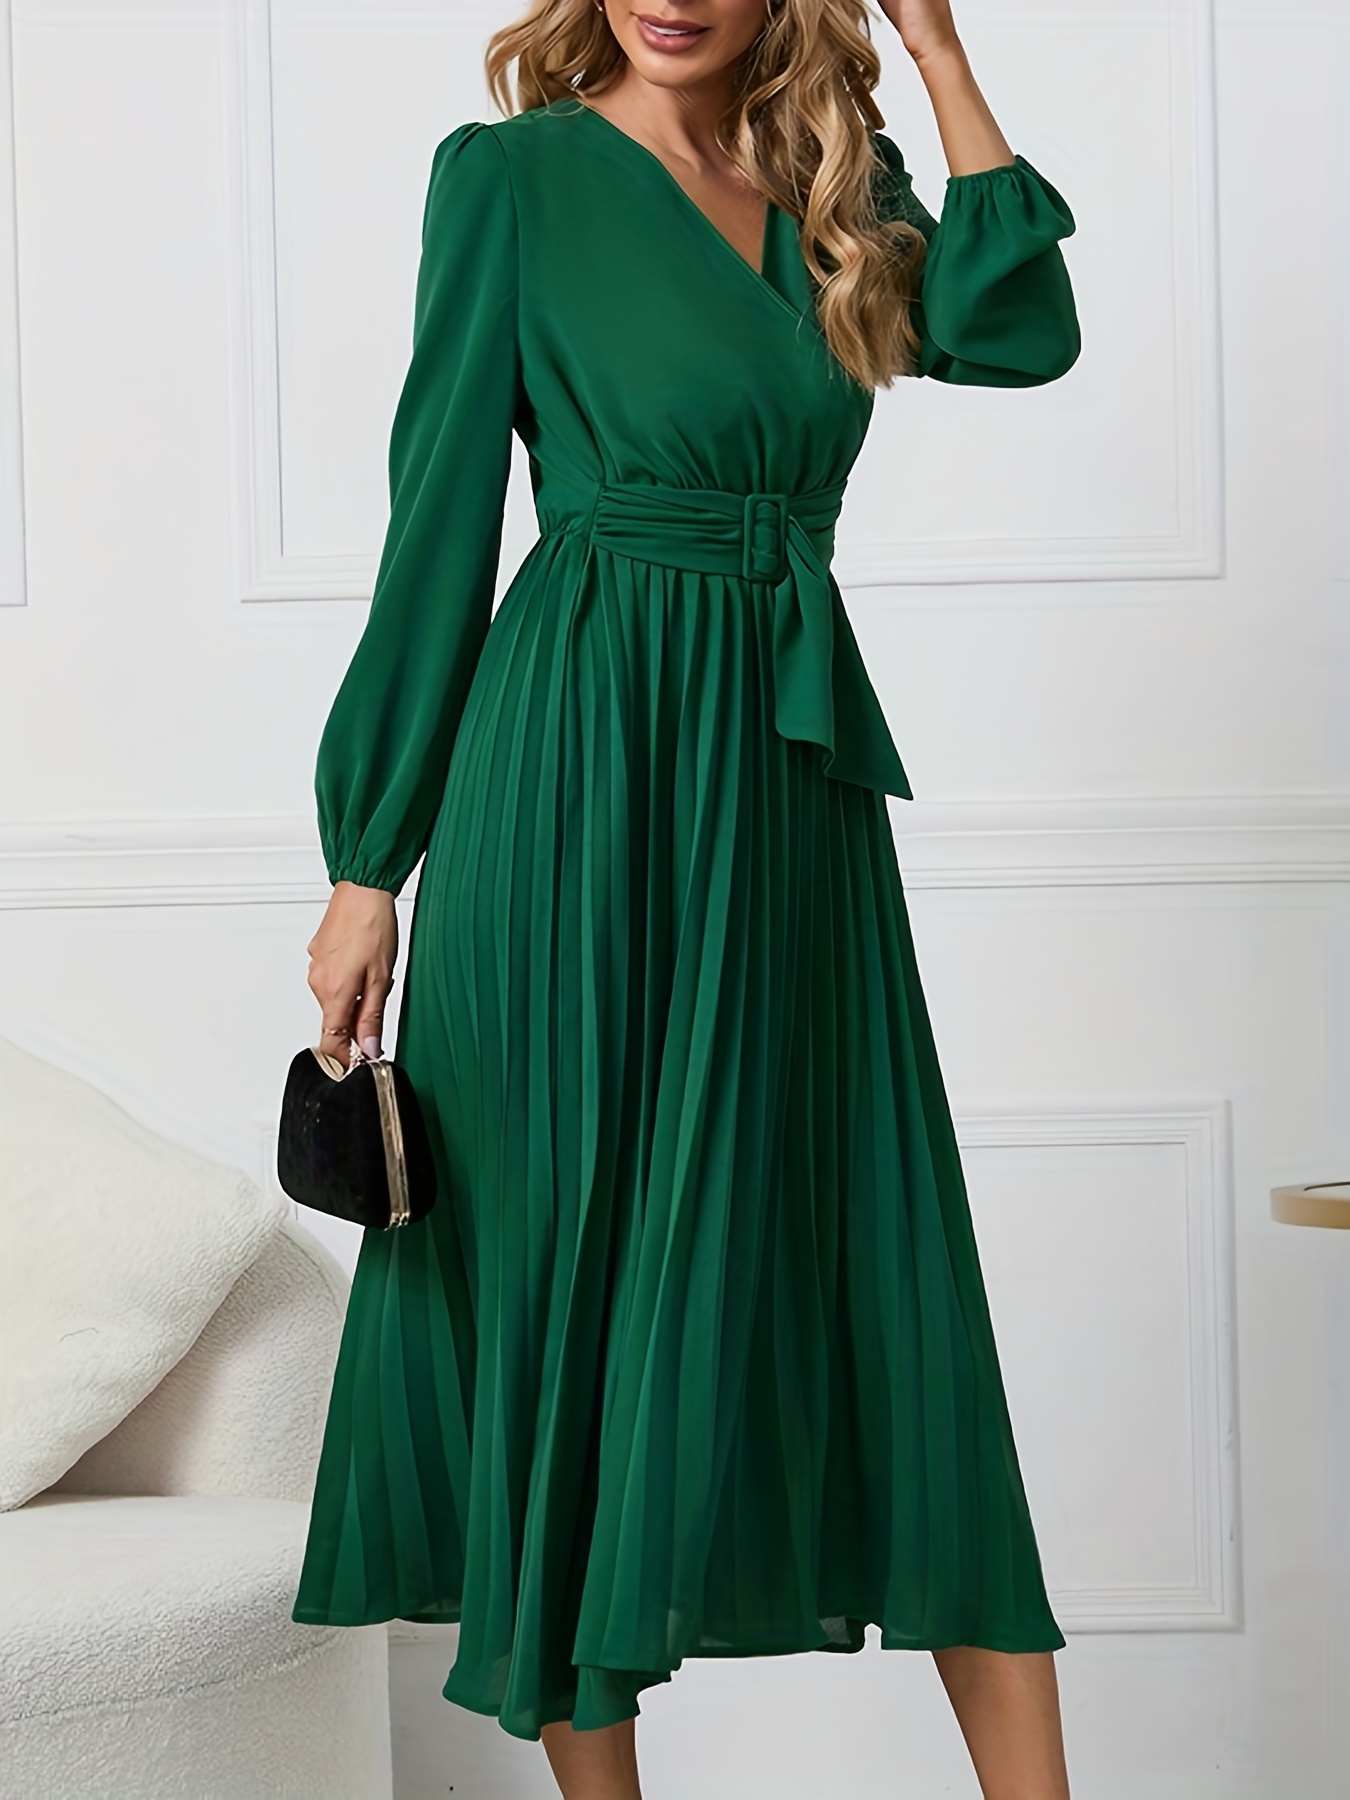 Spense Boat Neck 3/4 Sleeve Gathered Pleated Solid Ponte Dress